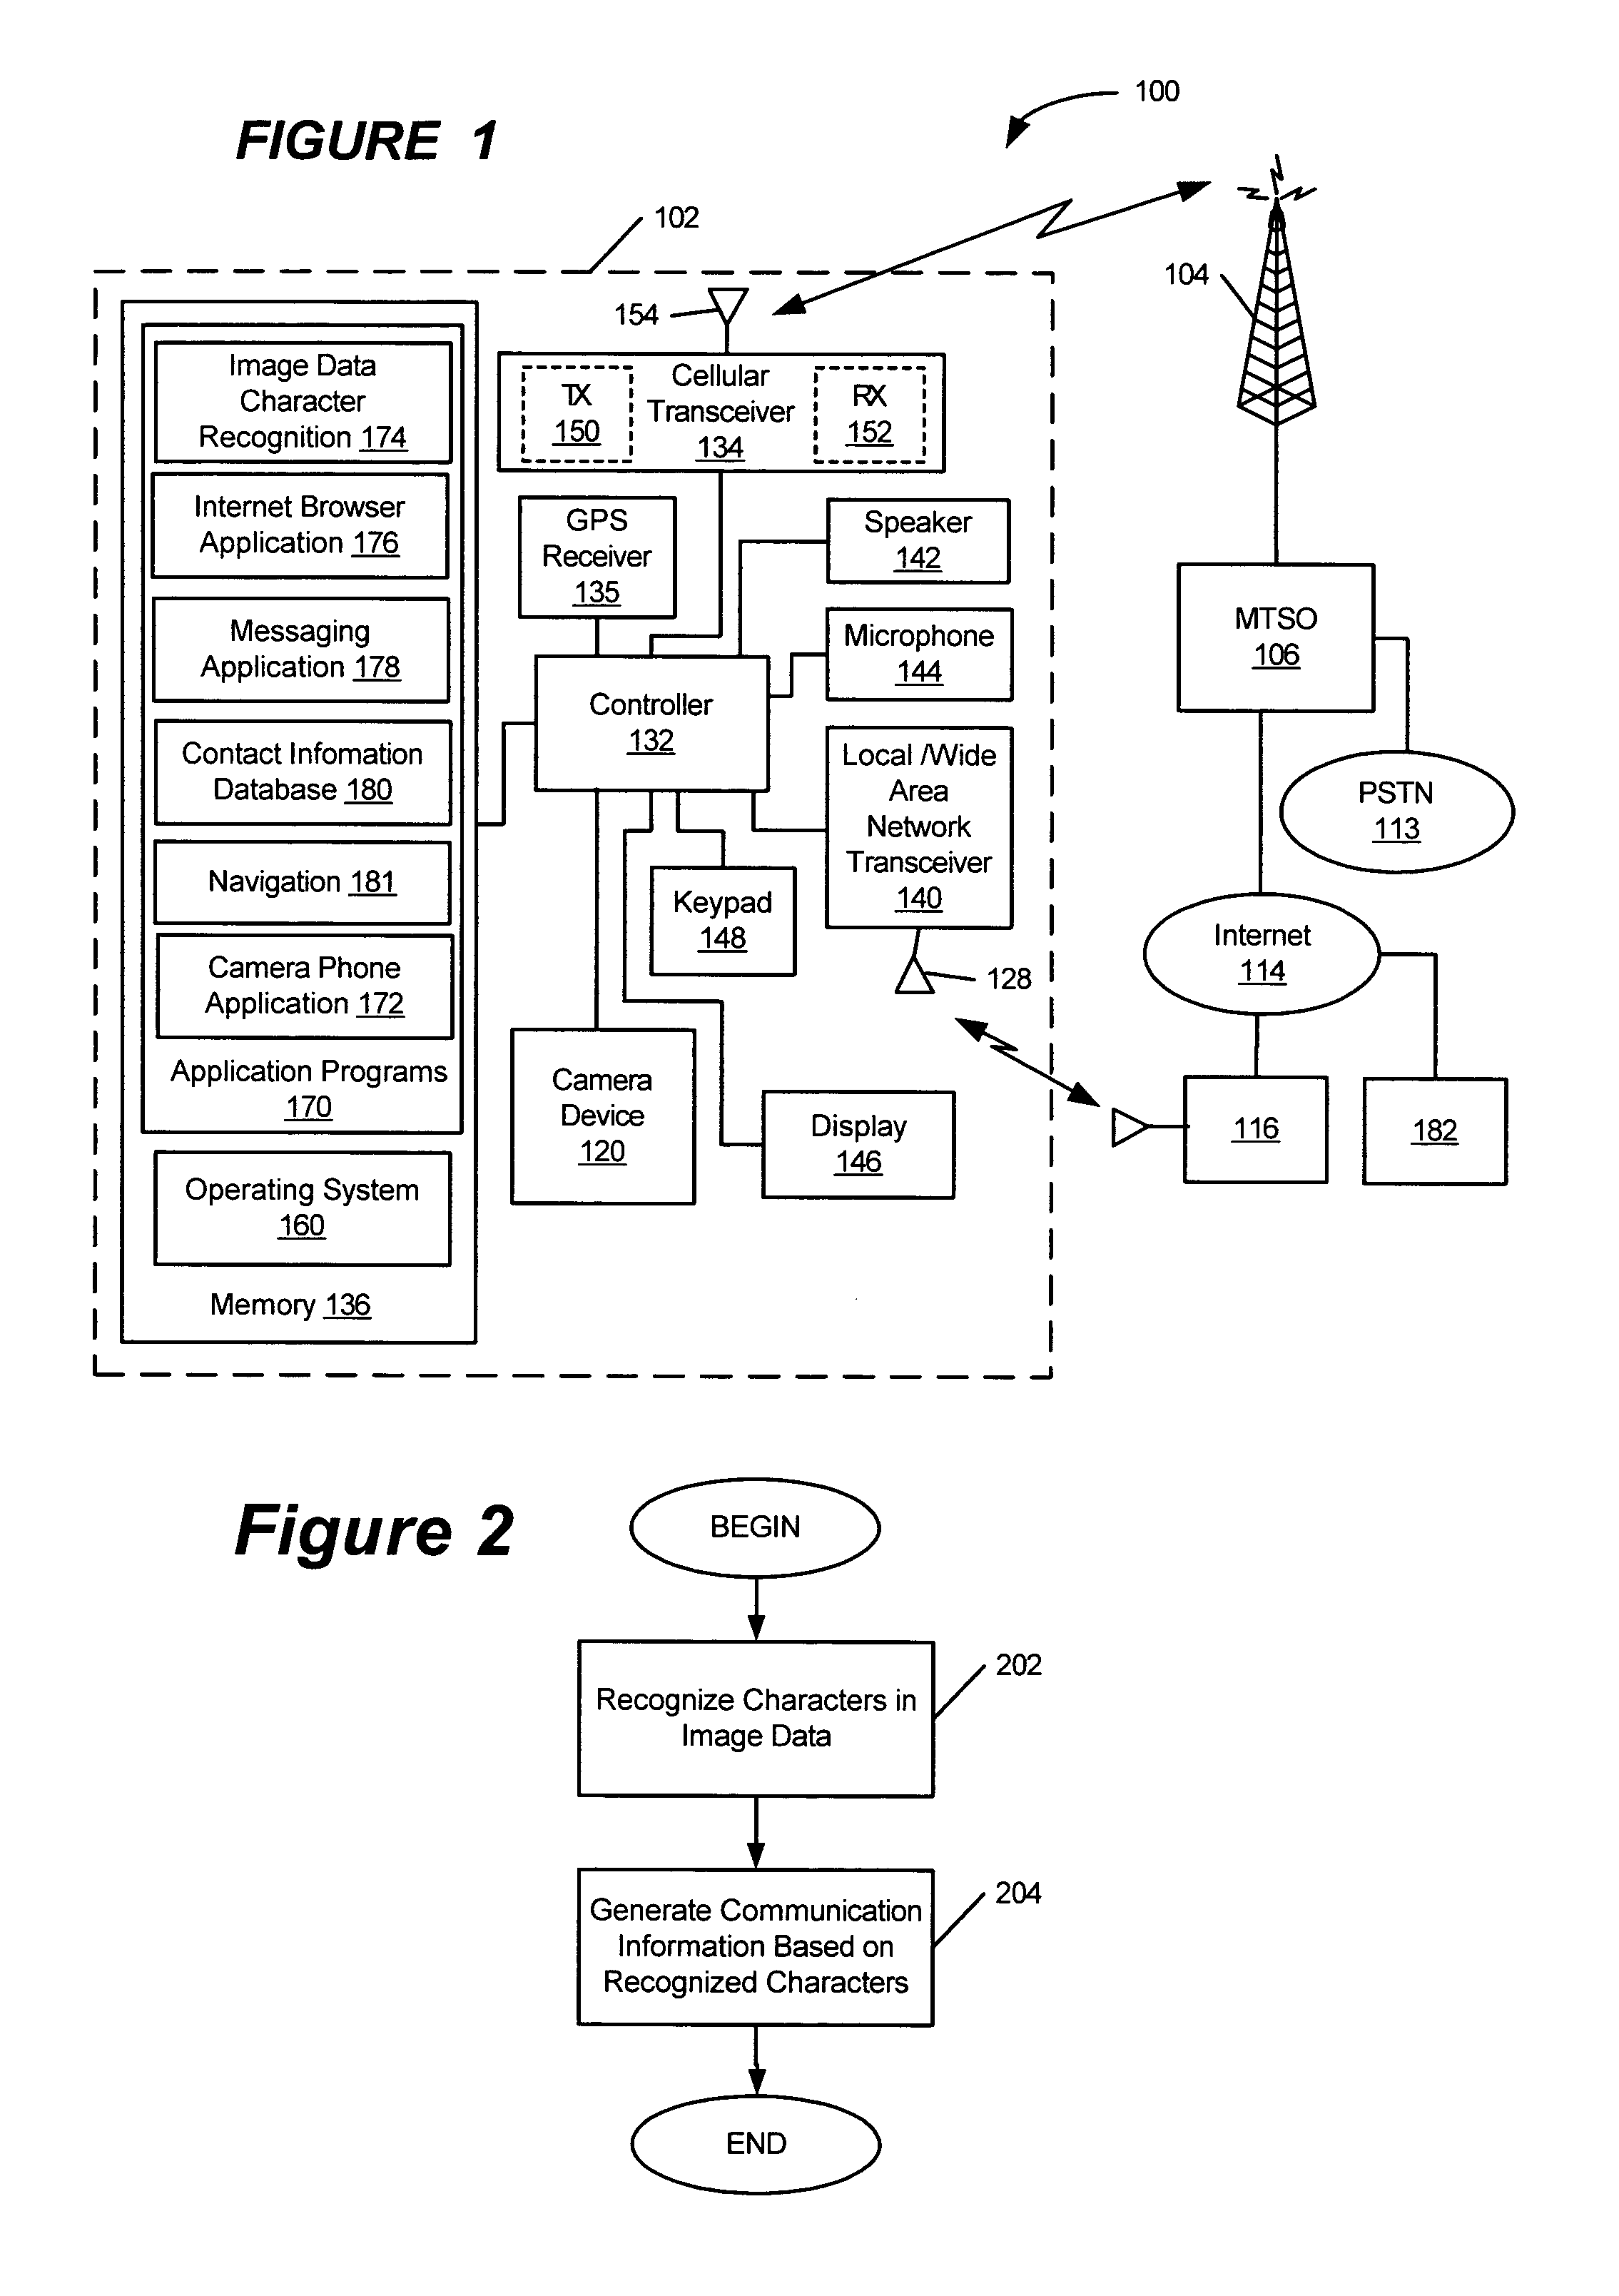 Mobile terminals, methods, and program products that generate communication information based on characters recognized in image data